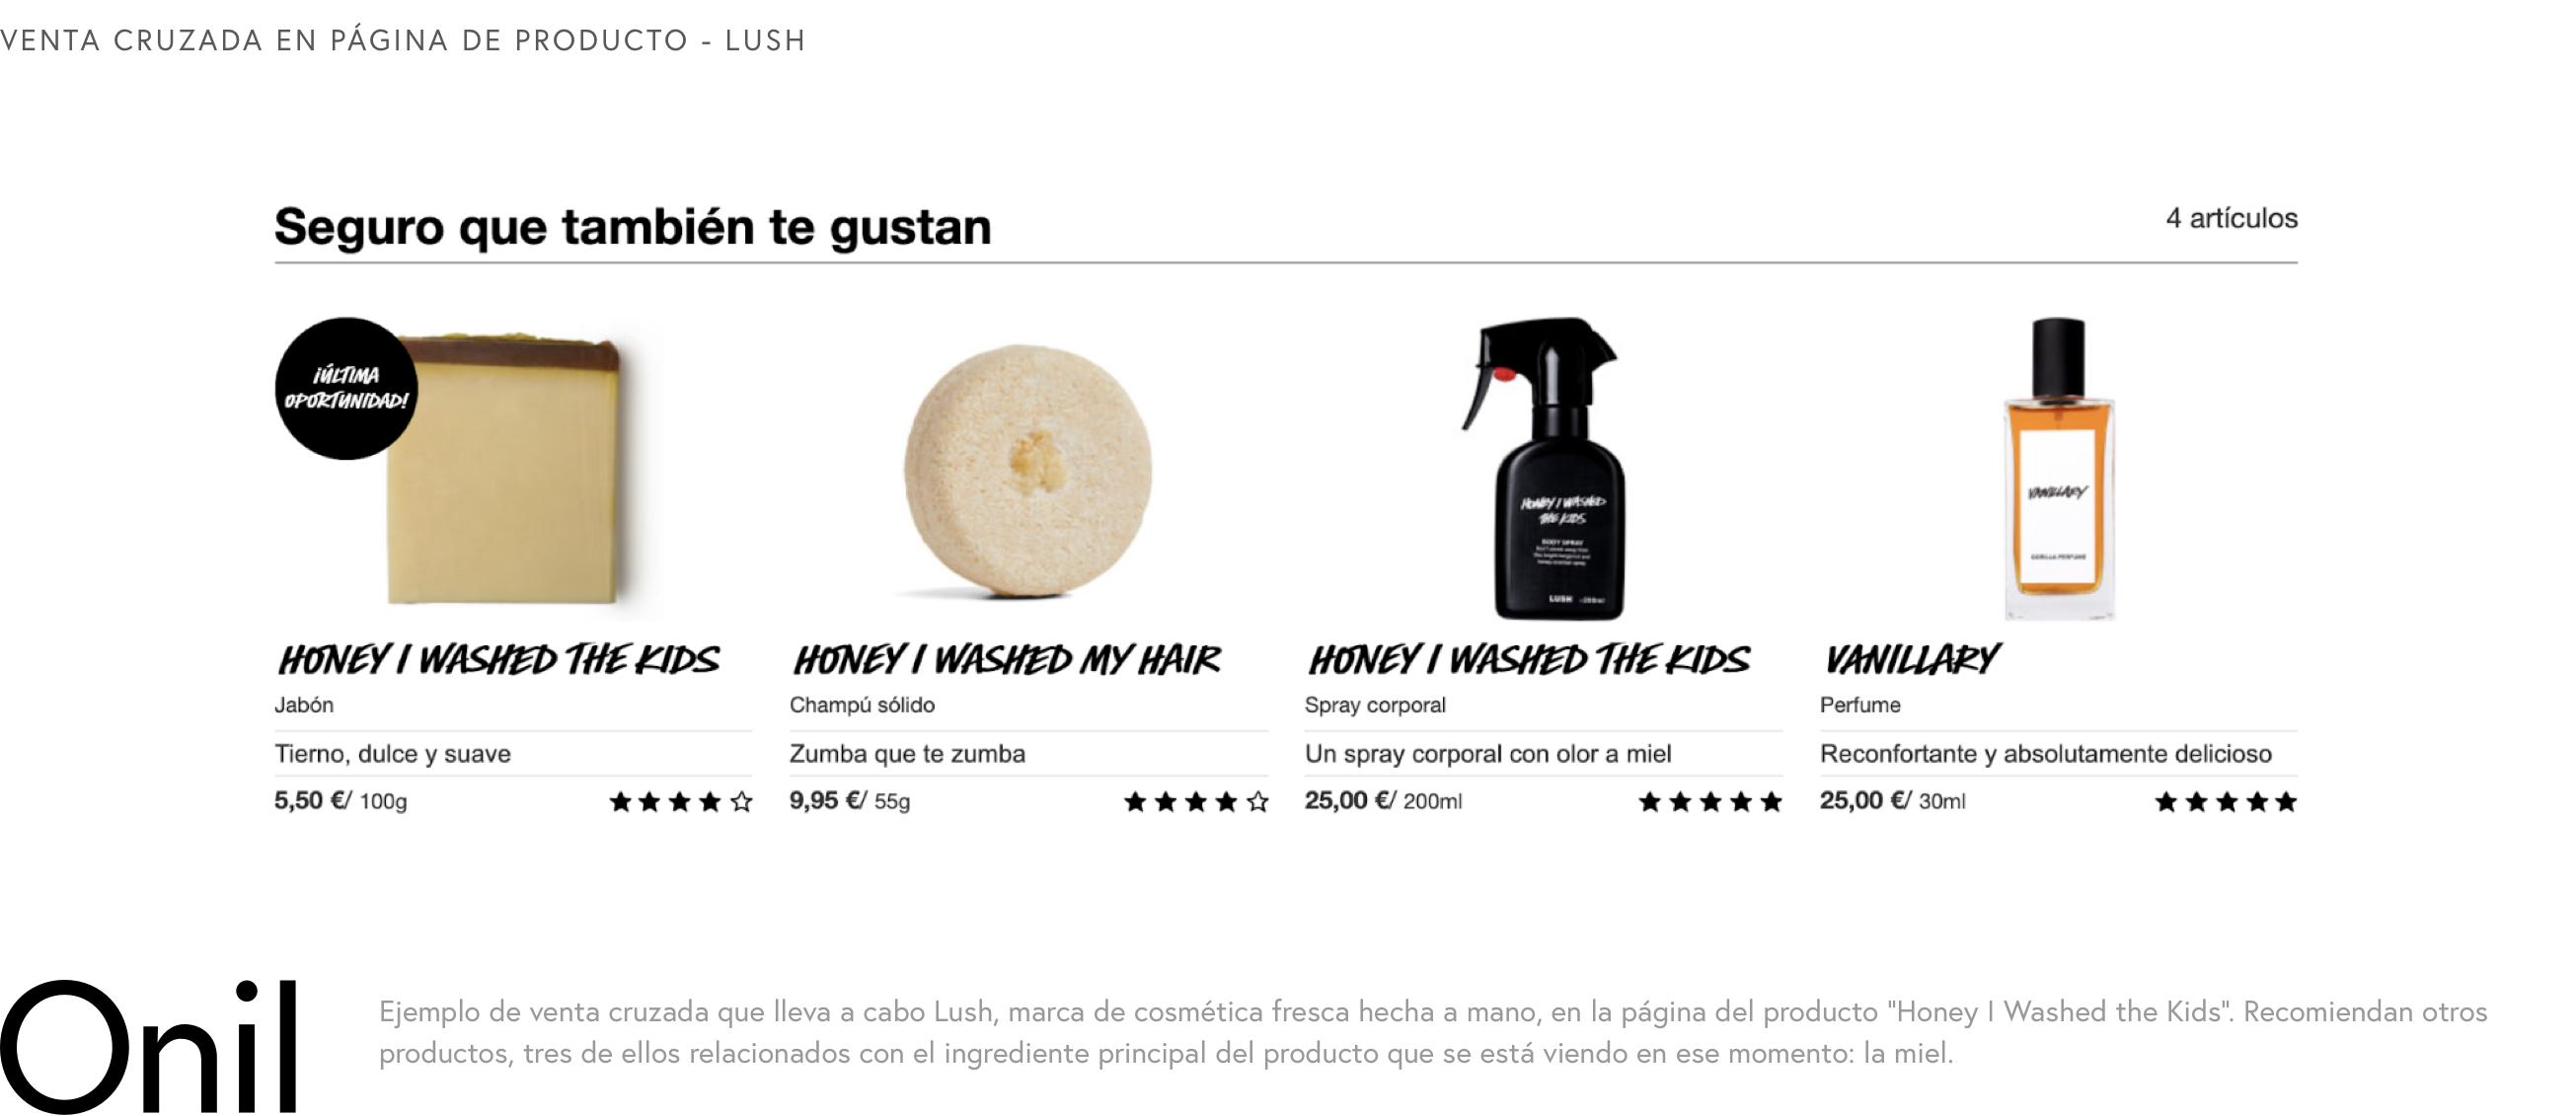 Product Page Cross-Sell - Example of a cross-sell carried out by Lush, a fresh handmade cosmetics brand, on the “Honey I Washed the Kids” product page. They recommend other products, three of them related to the main ingredient of the product being viewed at the moment: honey.